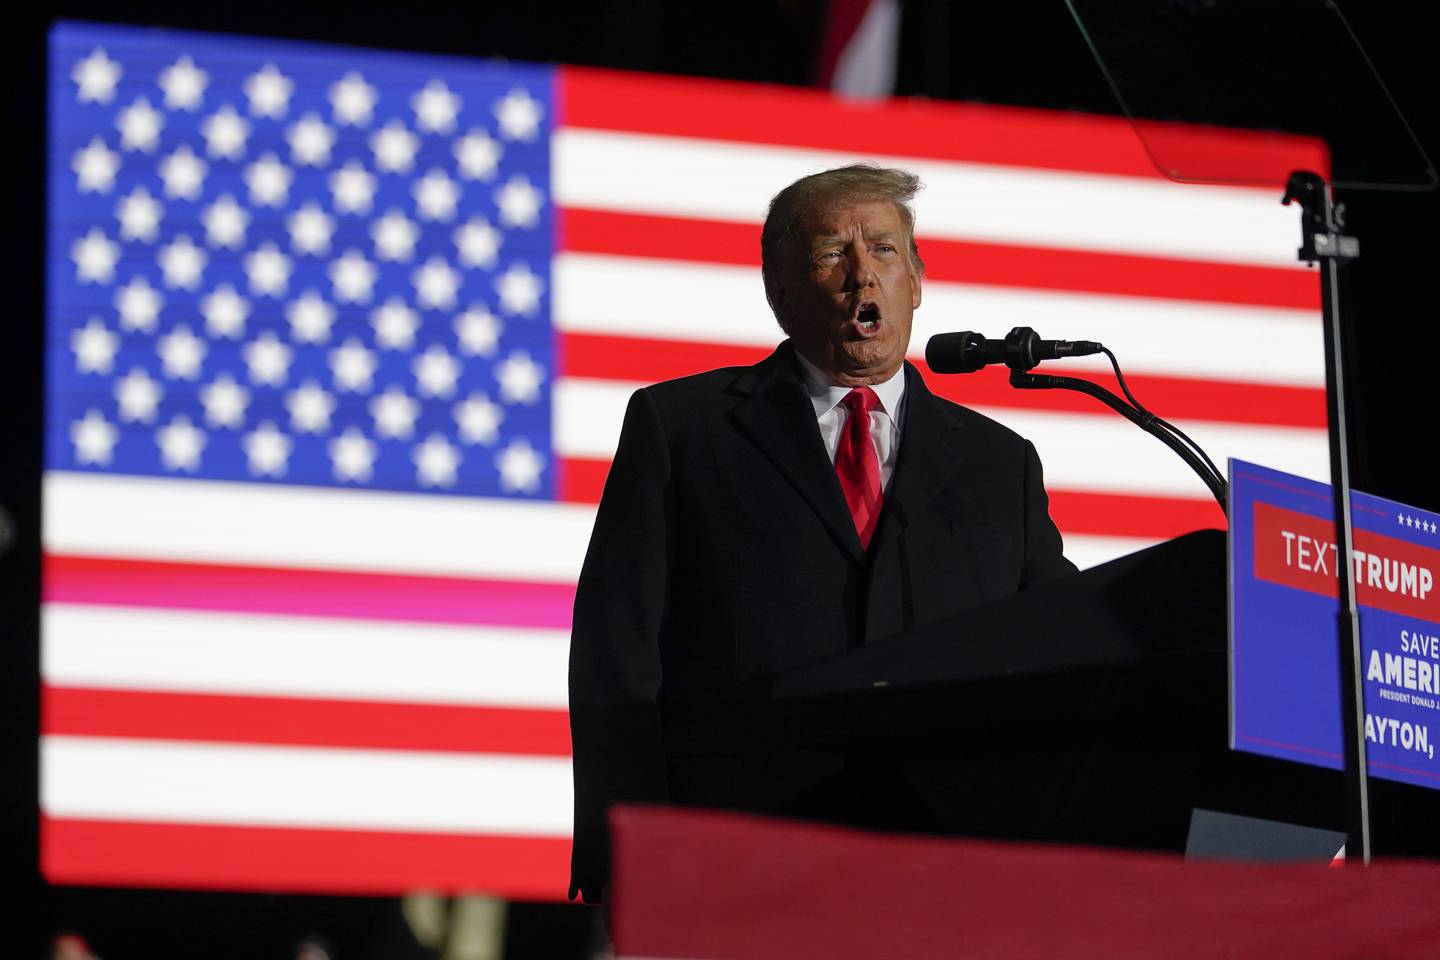 Former President Donald Trump speaks at a campaign rally in support of the campaign of Ohio Senate candidate JD Vance at Wright Bros. Aero Inc. at Dayton International Airport on Monday, Nov. 7, 2022, in Vandalia. (AP Photo/Michael Conroy)